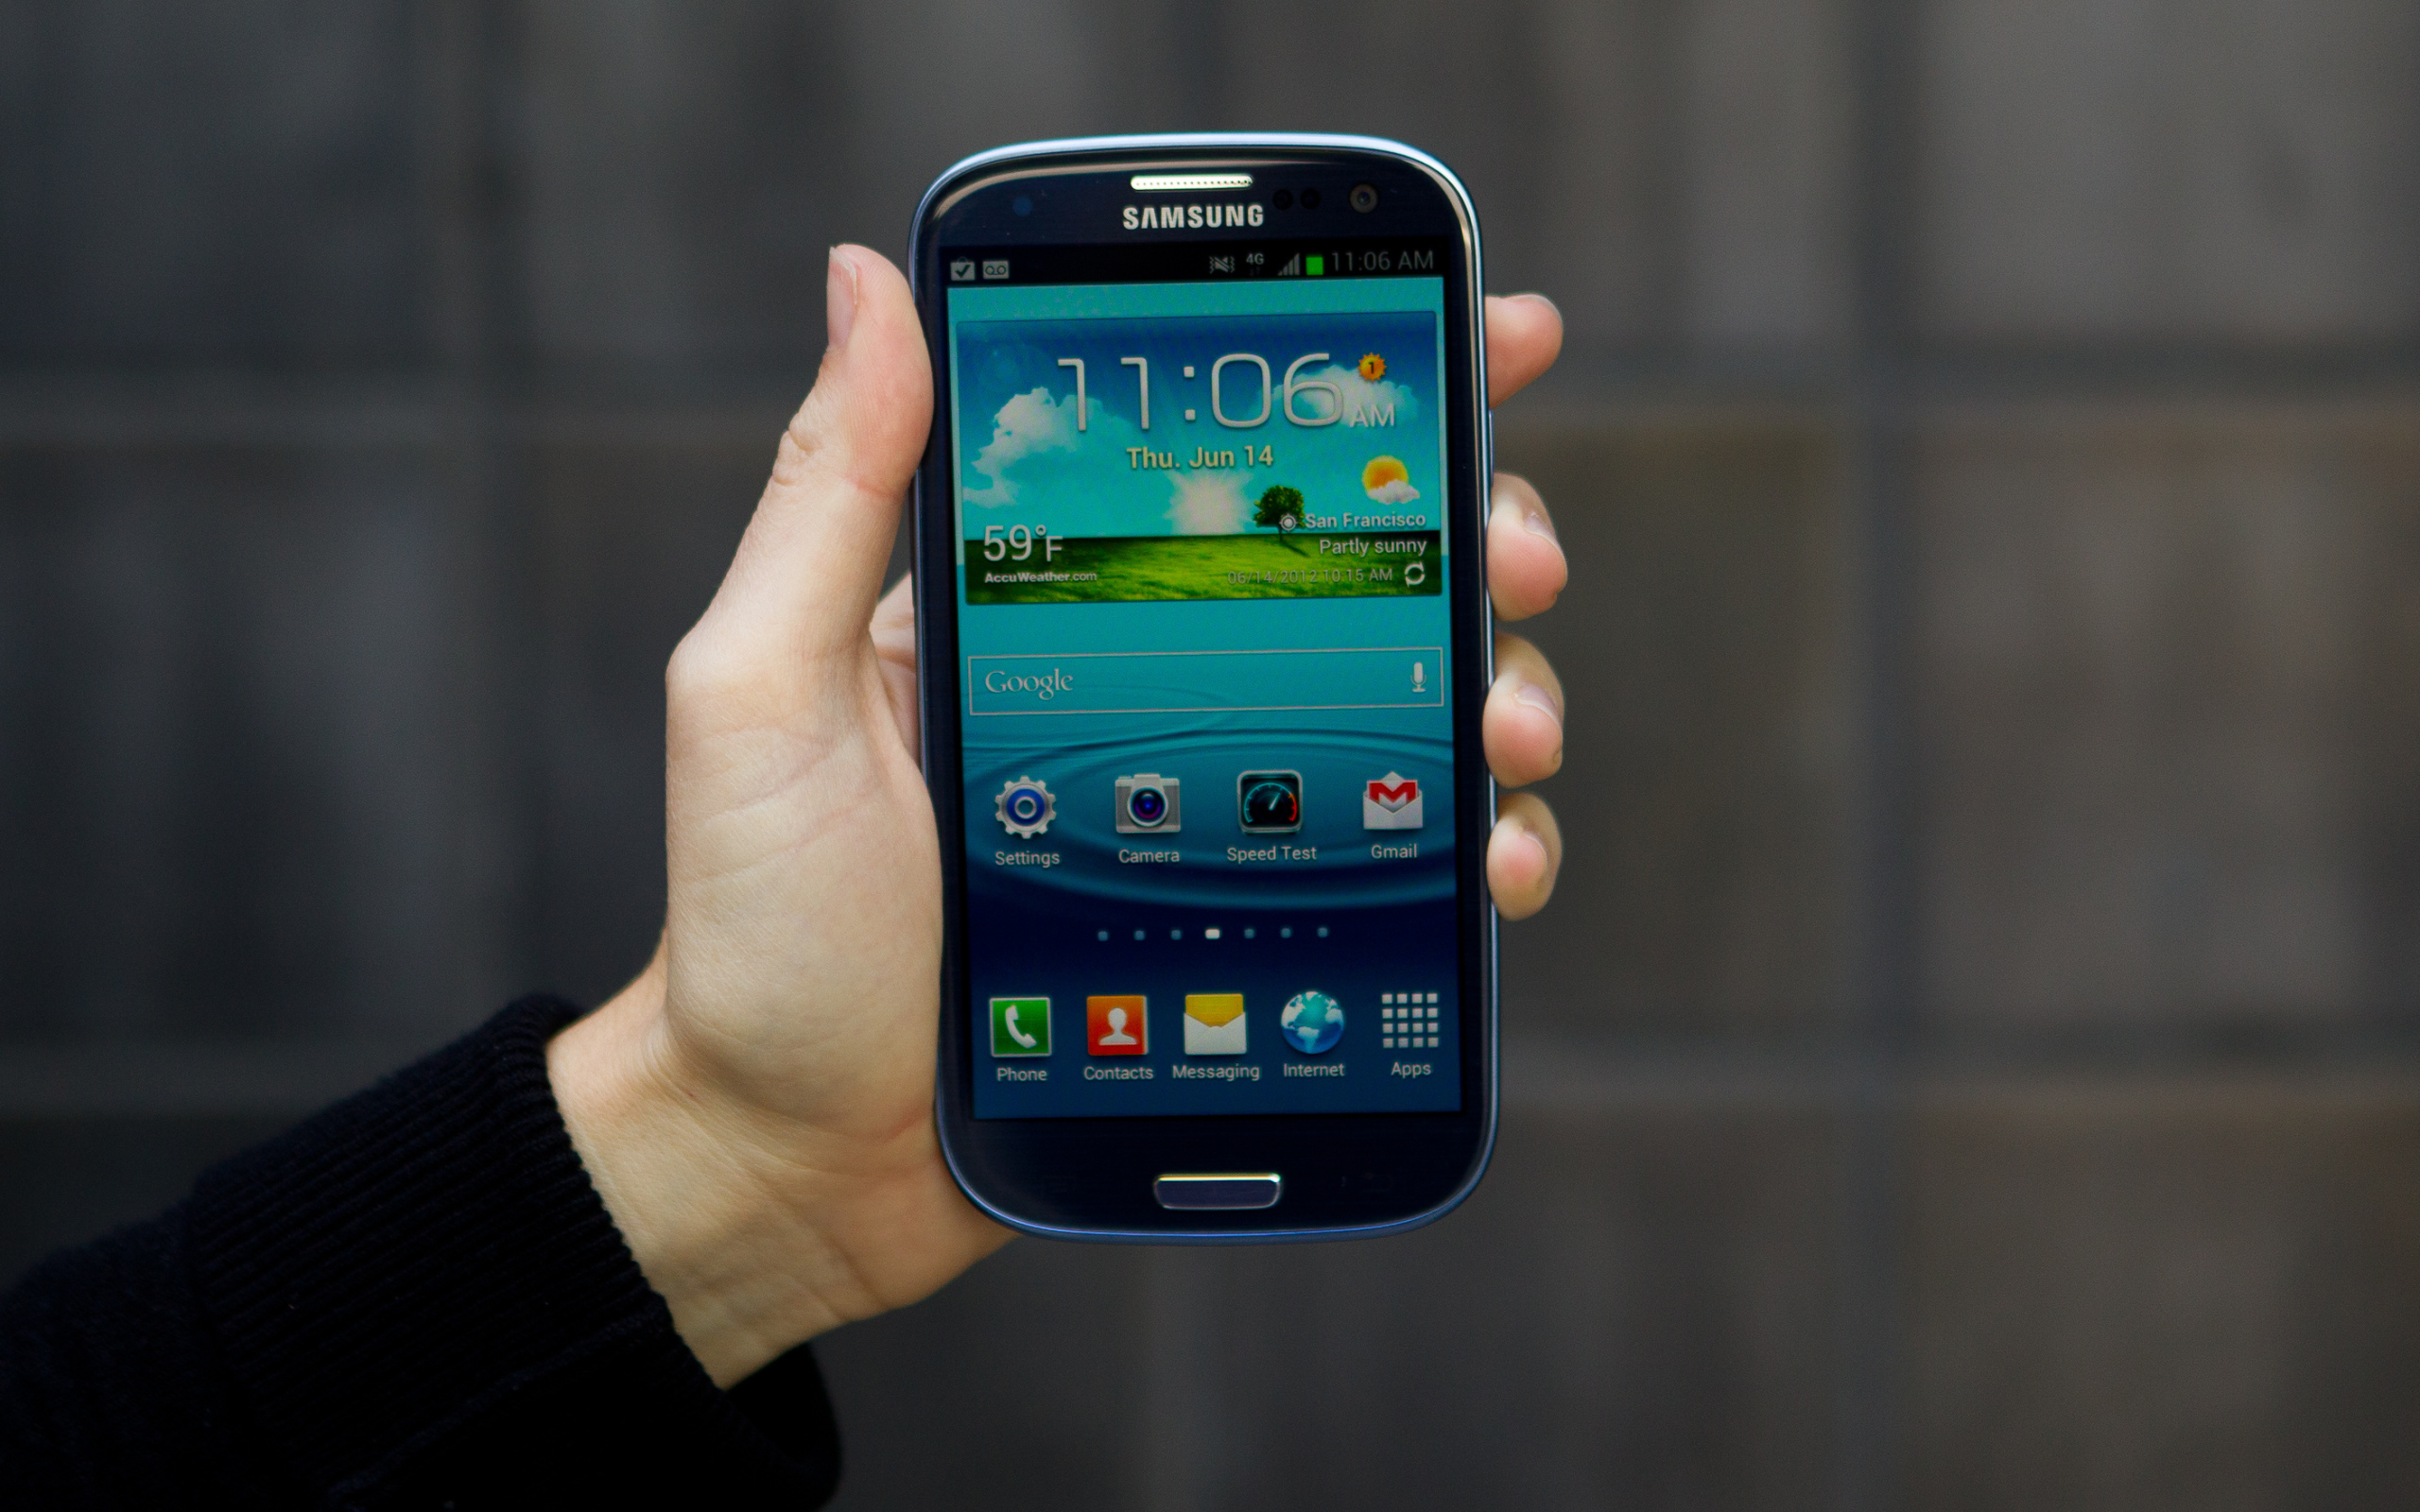 How To Do A Software Update On Samsung Galaxy S3